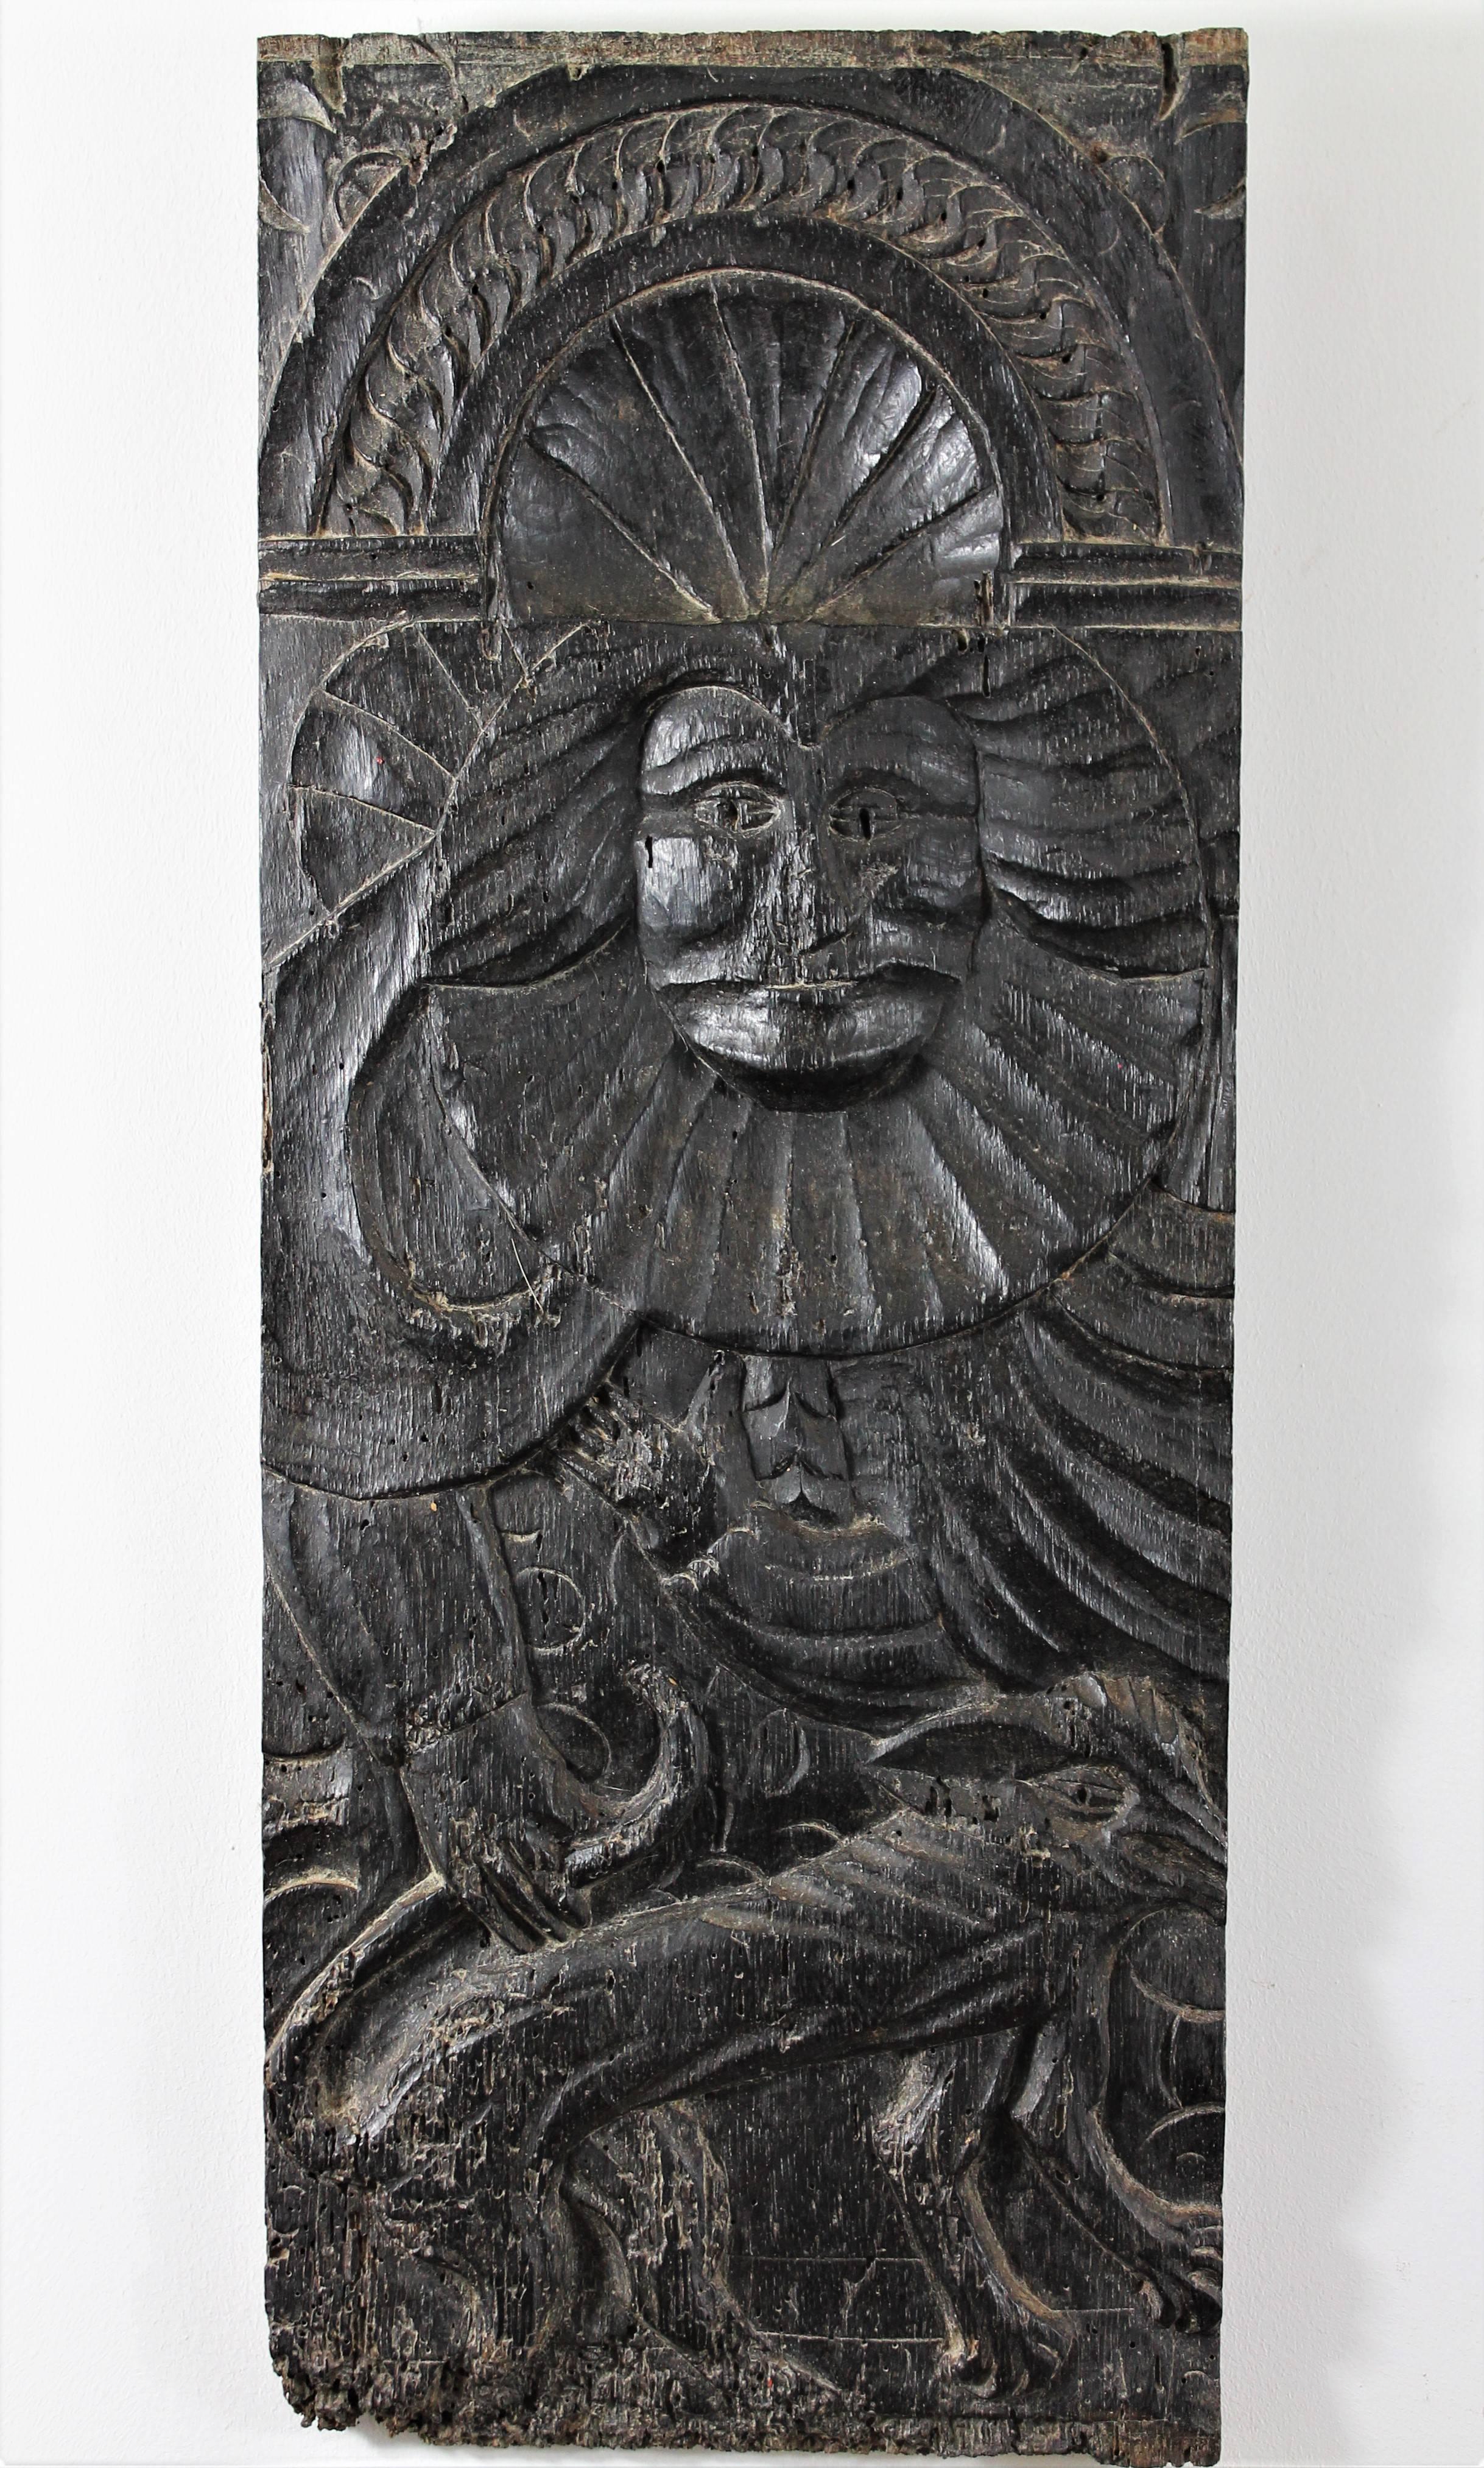 Set of two 16th century oak panels, one representing a character accompanied by a dog, the other a character in flames, probably saints.
These panels probably come from a chest or a Renaissance period cabinet, it was customary when the furniture